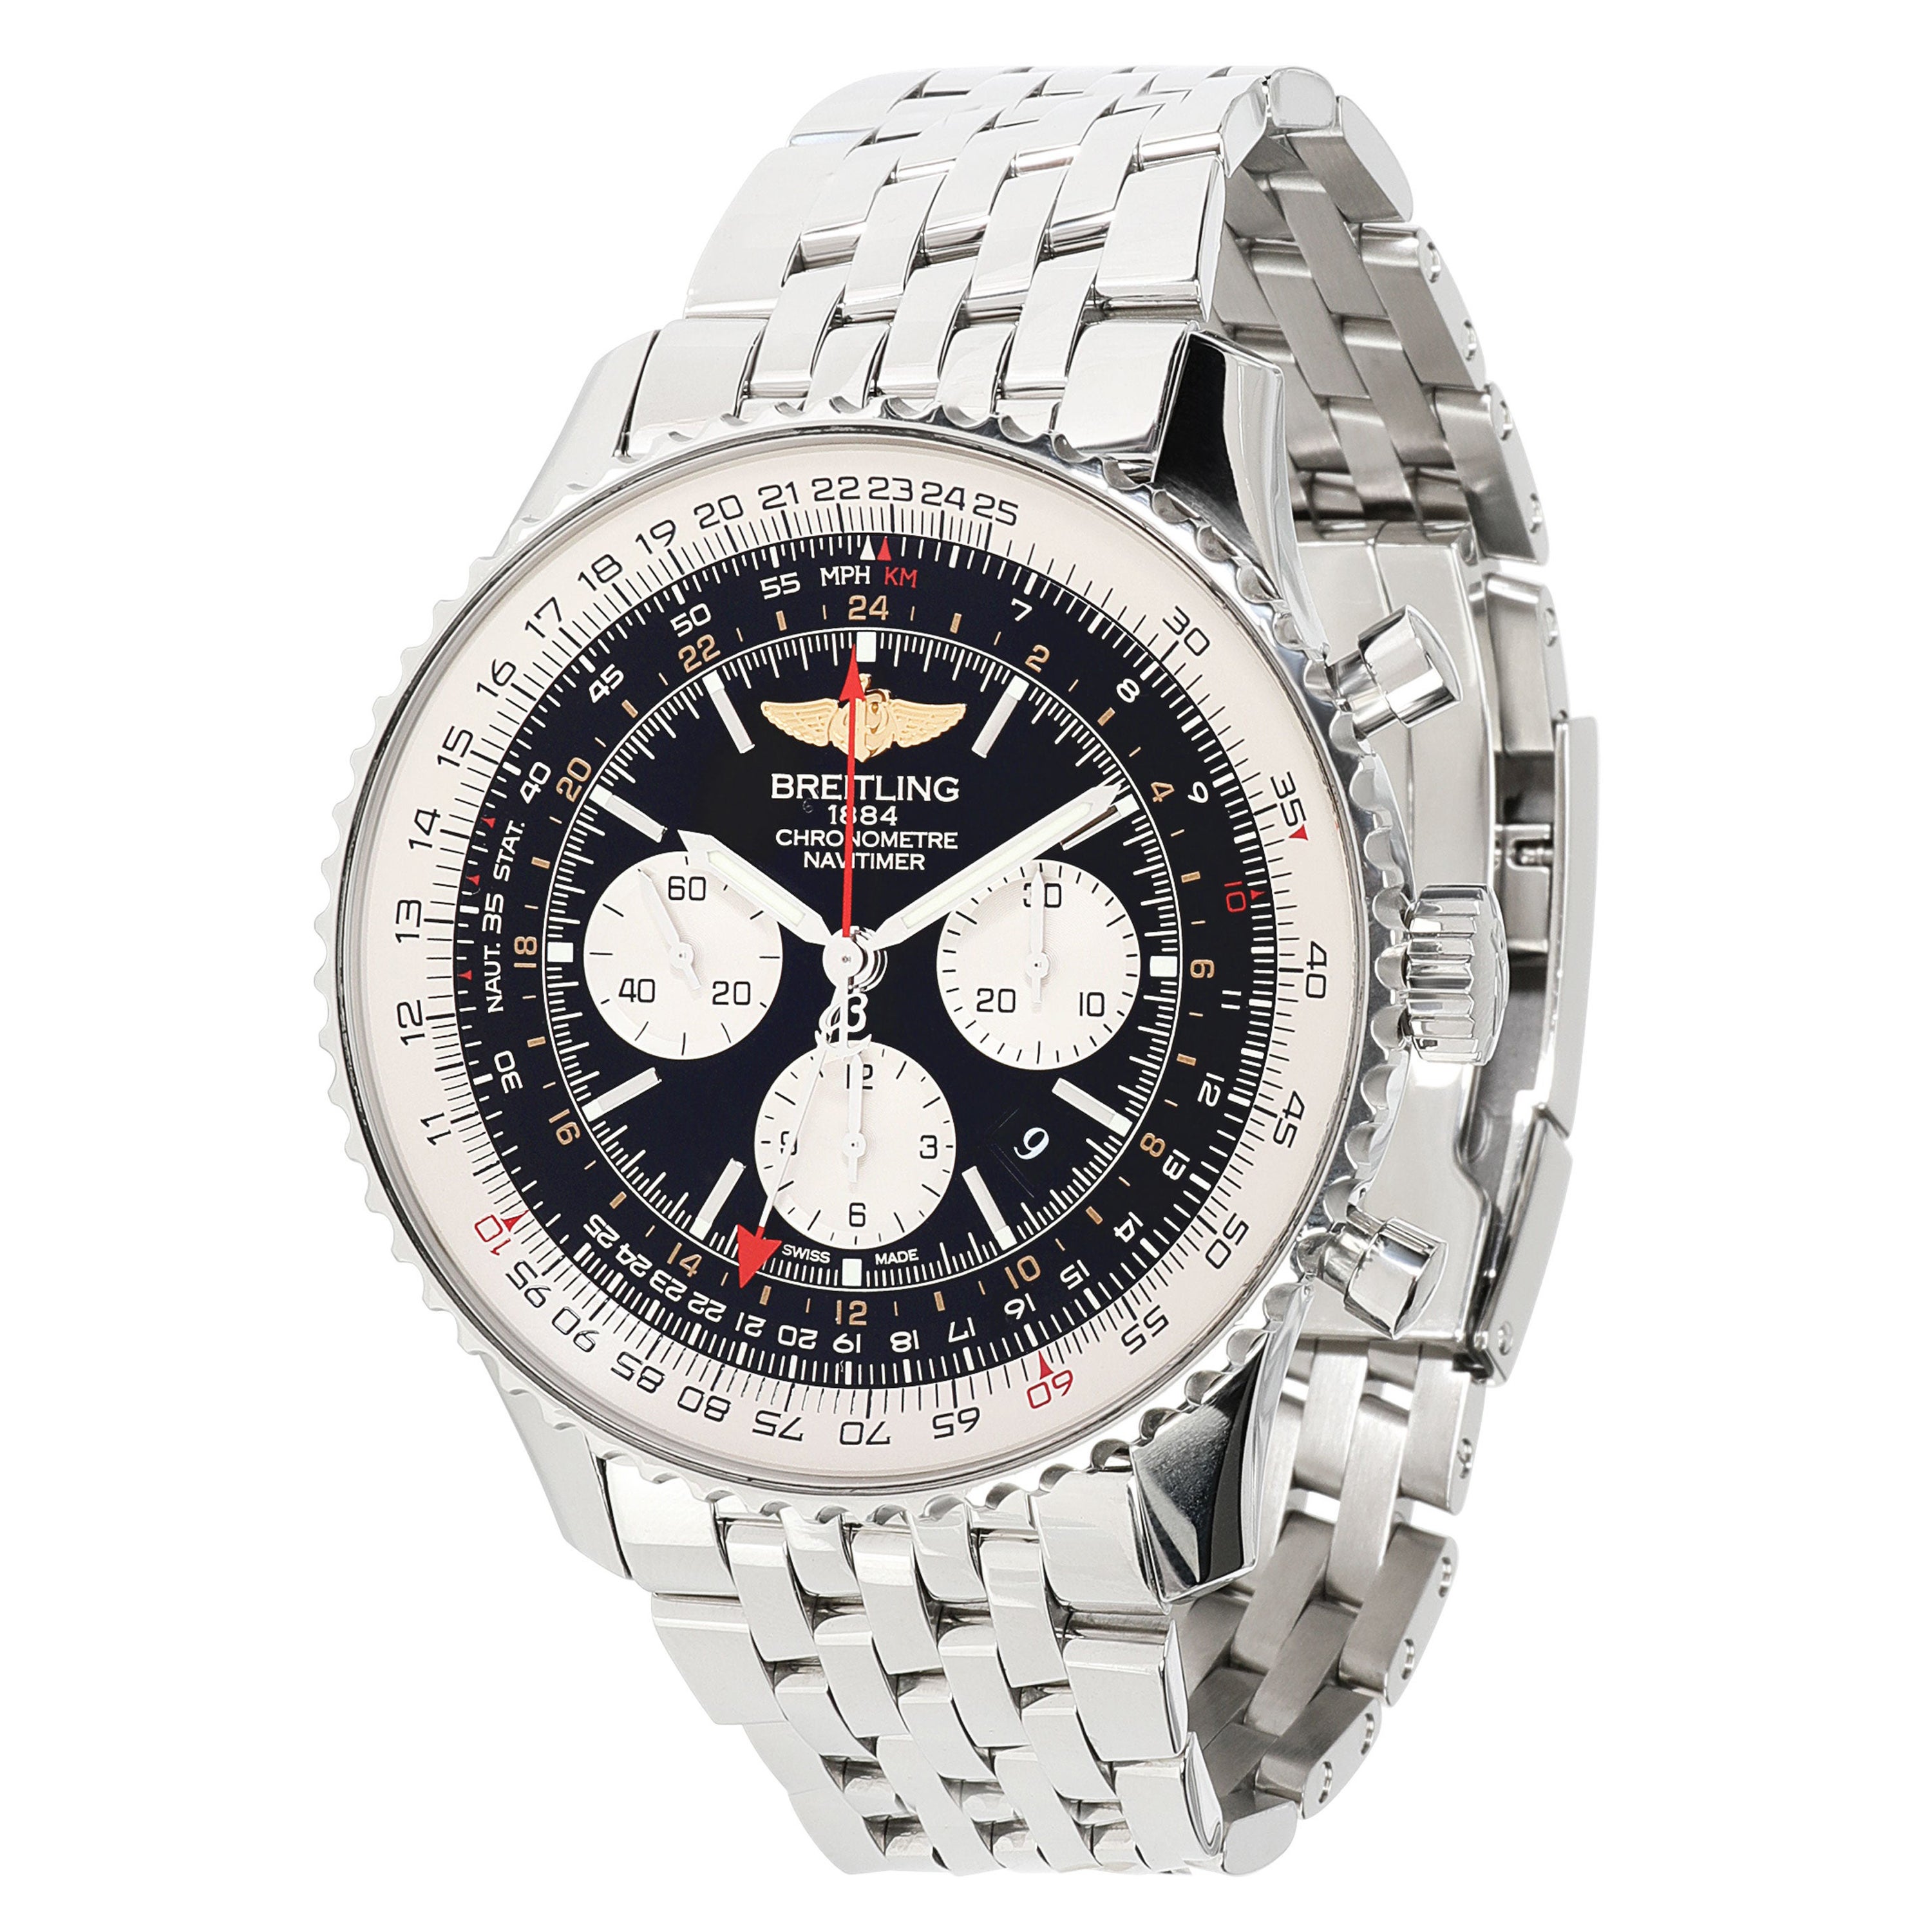 Breitling Navitimer GMT AB044121/BD24 Men's Watch in Stainless Steel